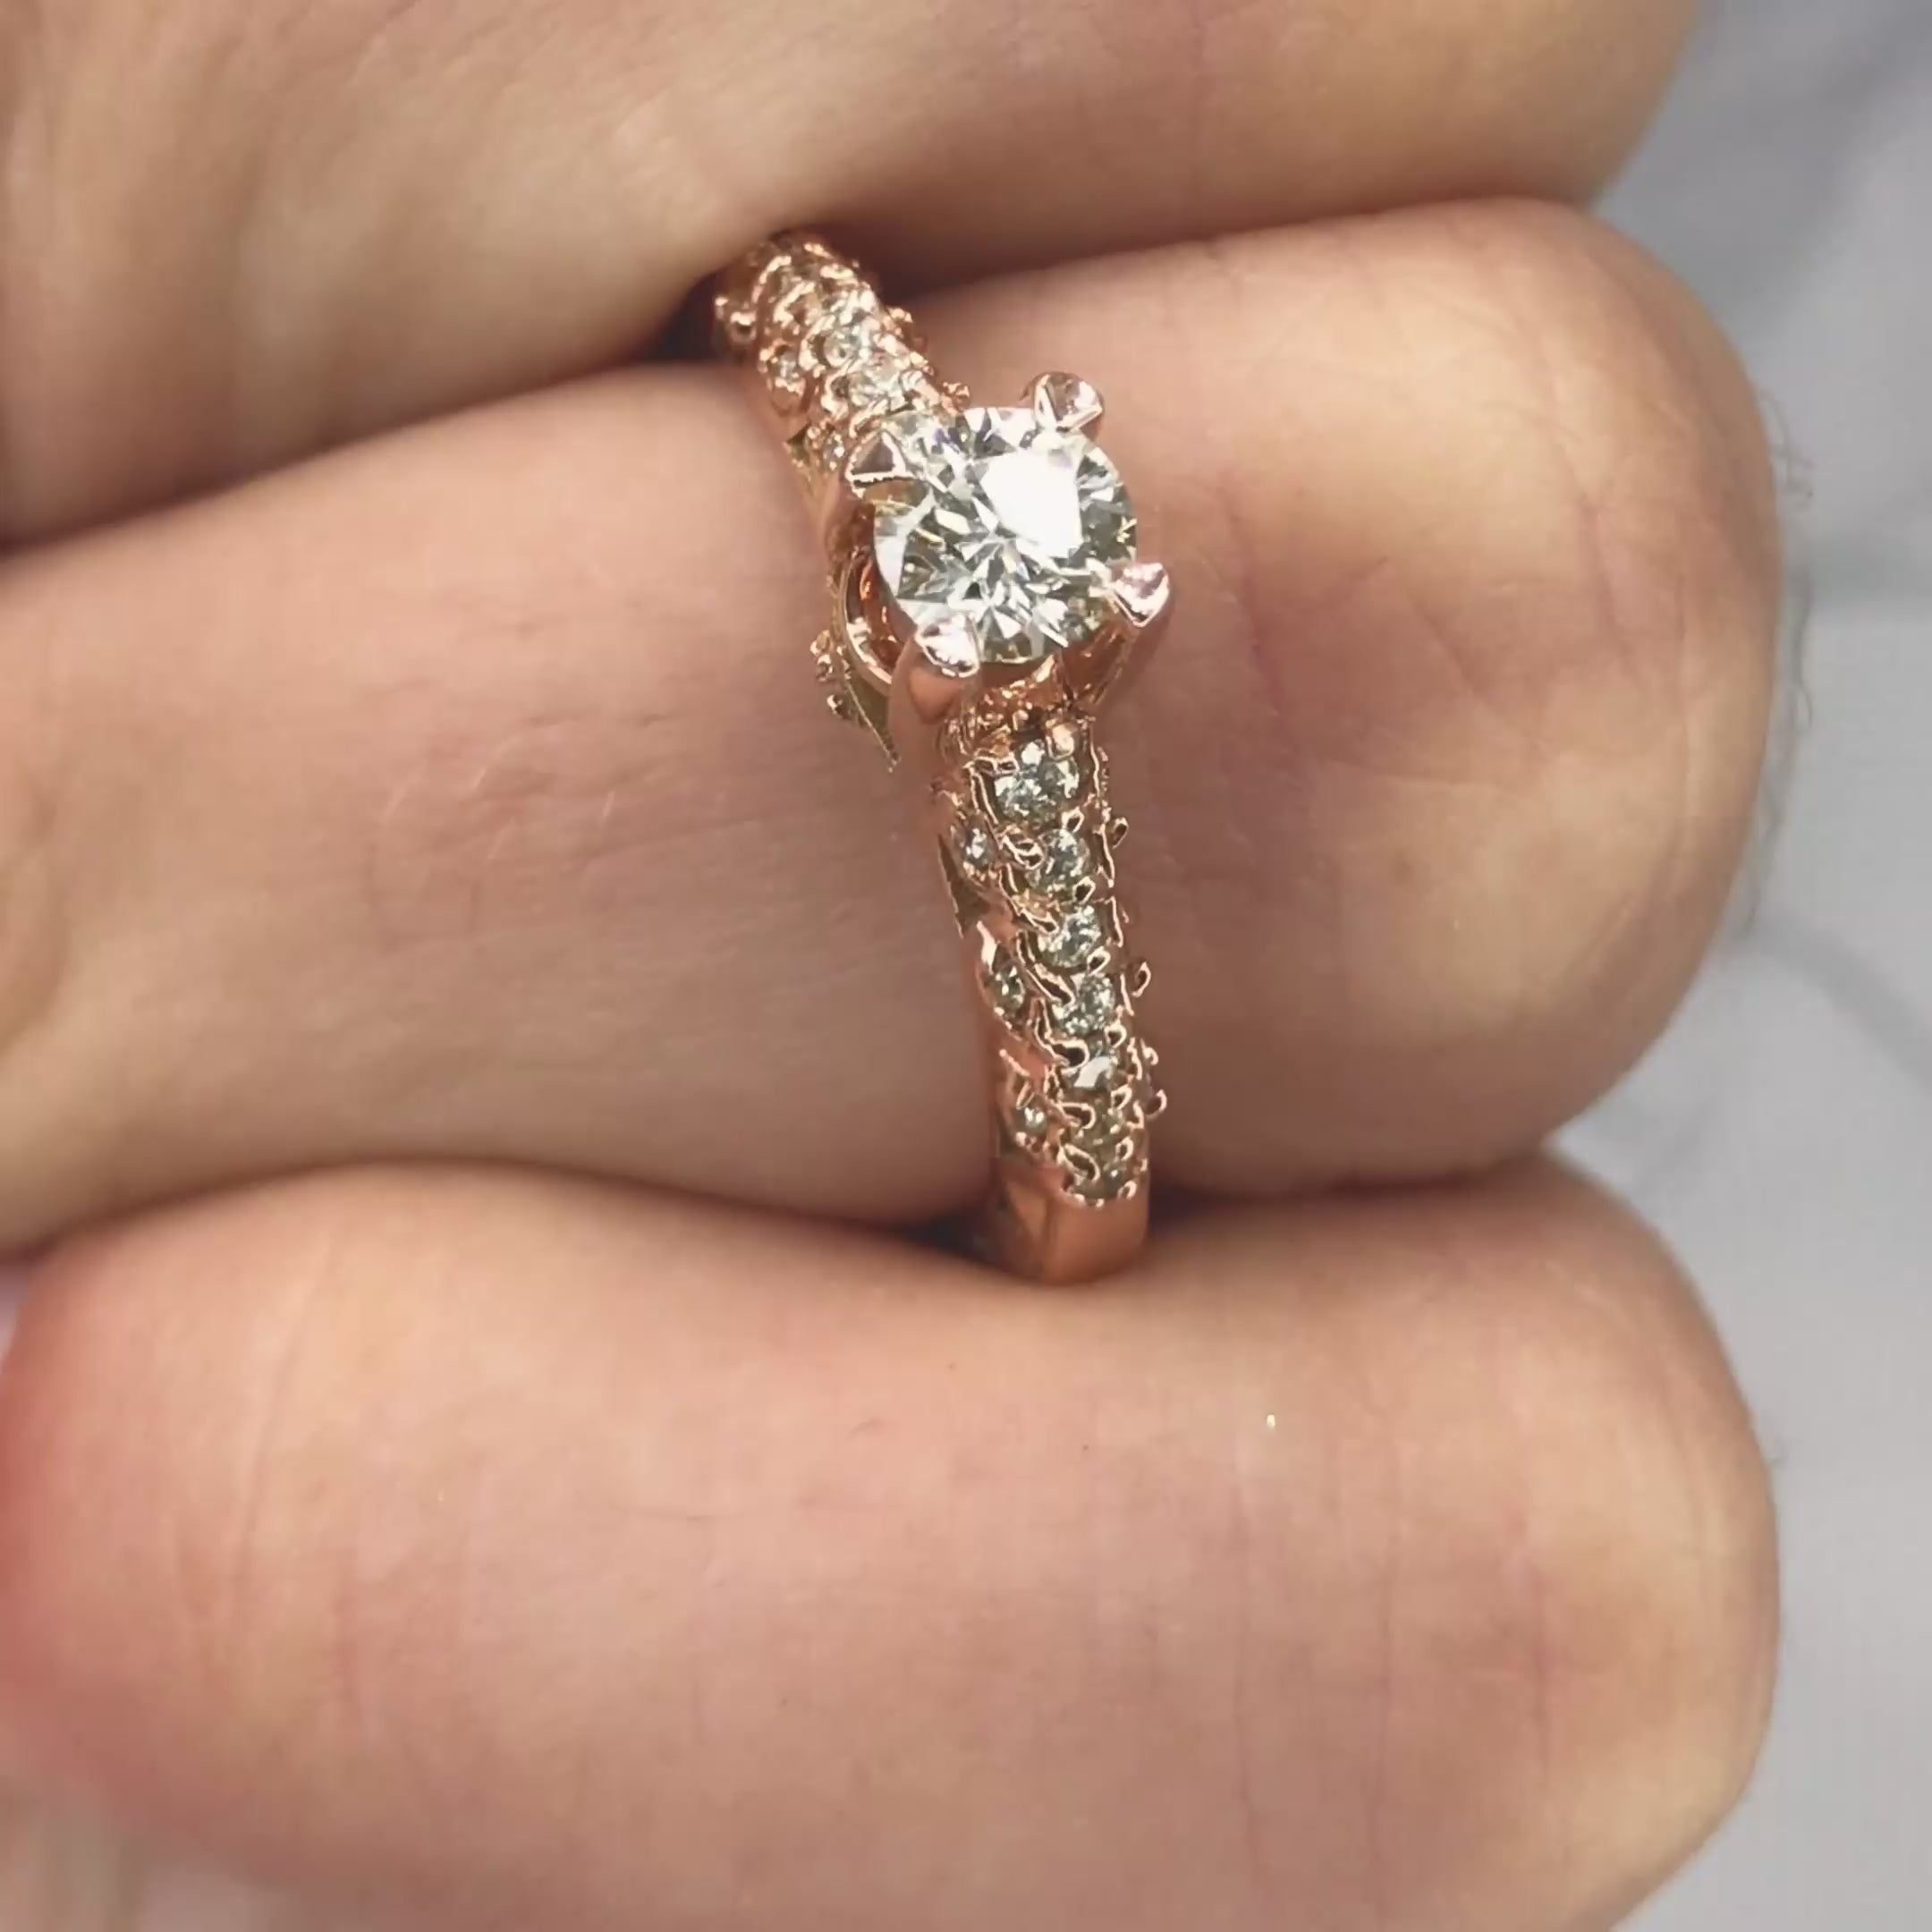 Limited 0.60 CT Round Cut Diamond Engagement Ring in 14K Rose Gold